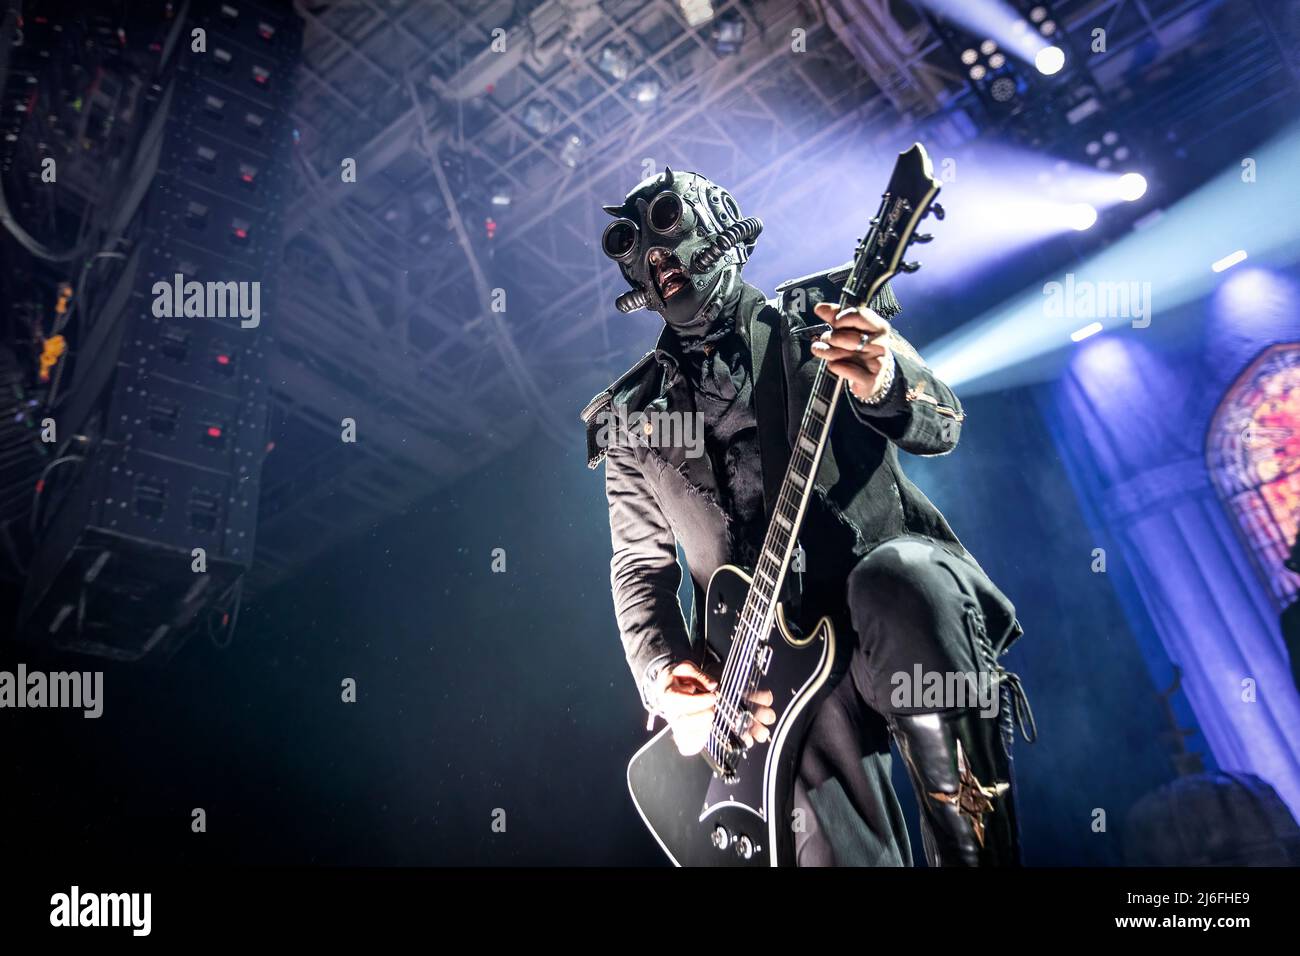 Oslo, Norway. 30th, April 2022. The Swedish rock band Ghost performs a live  concert at Oslo Spektrum in Oslo. Here a band member, a Nameless Ghouls, is  seen live on stage. (Photo